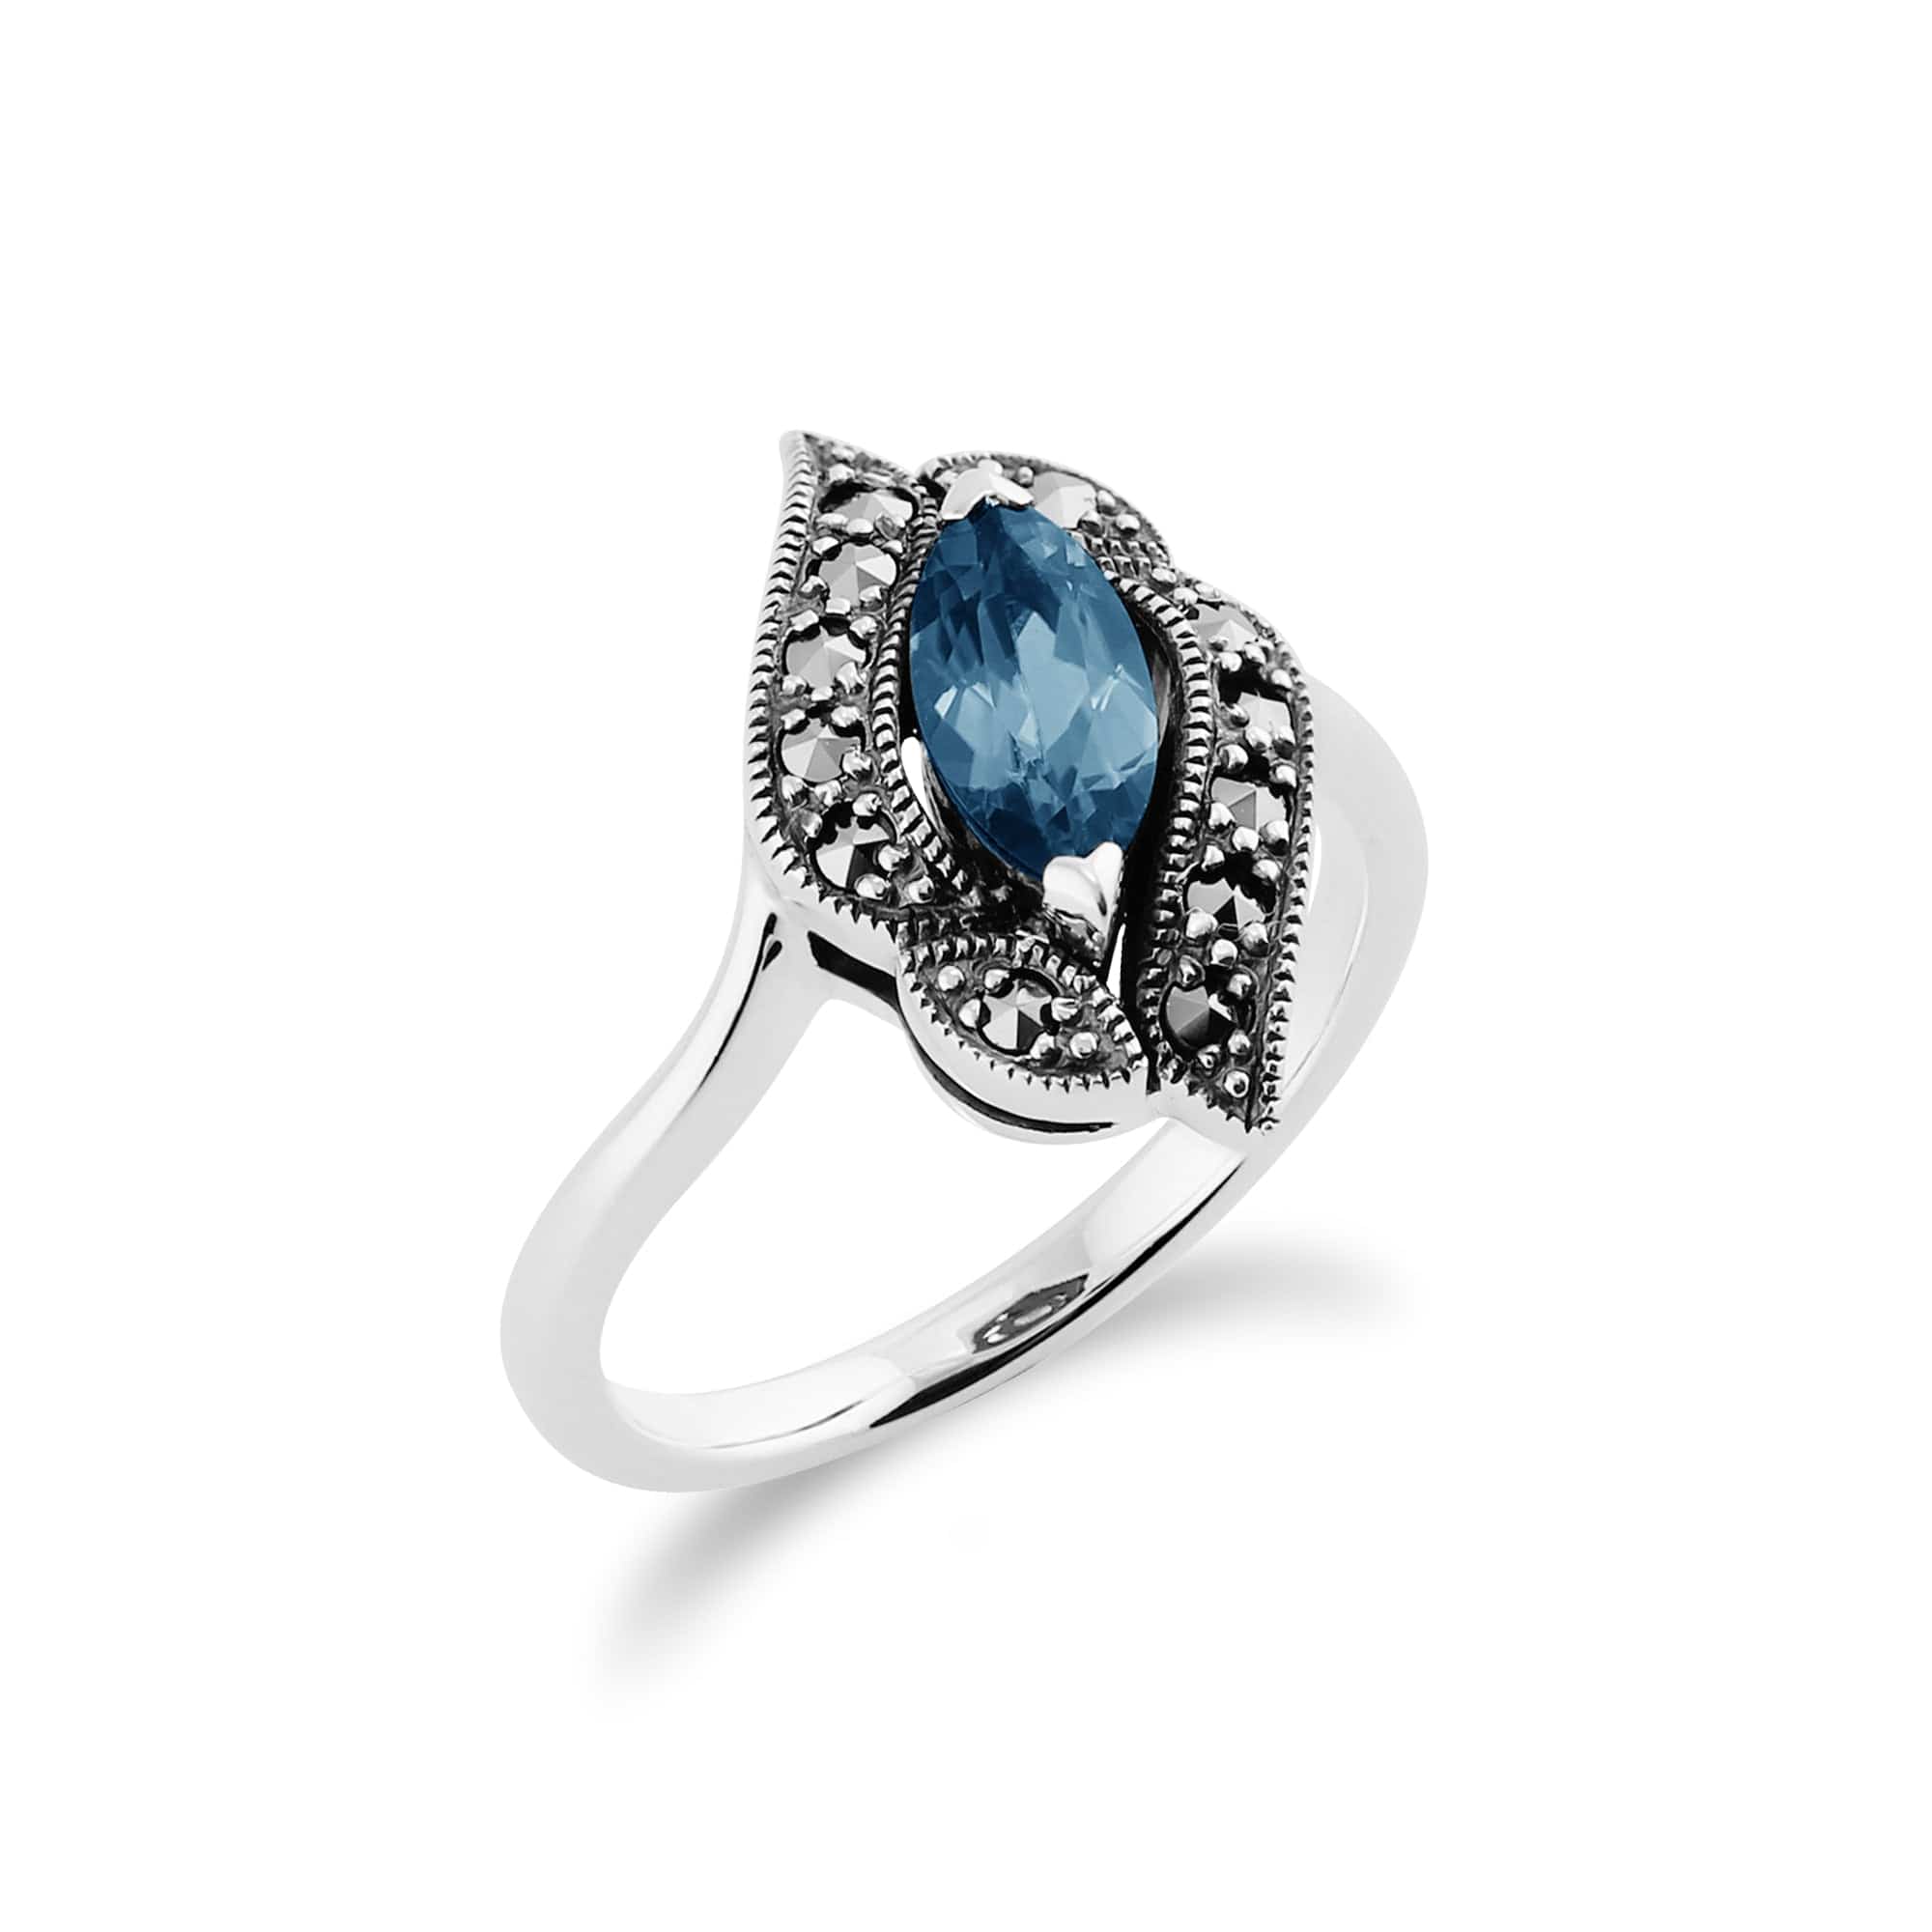 214R392605925 Art Nouveau Style Marquise Blue Topaz & Marcasite Ring in 925 Sterling Silver 2